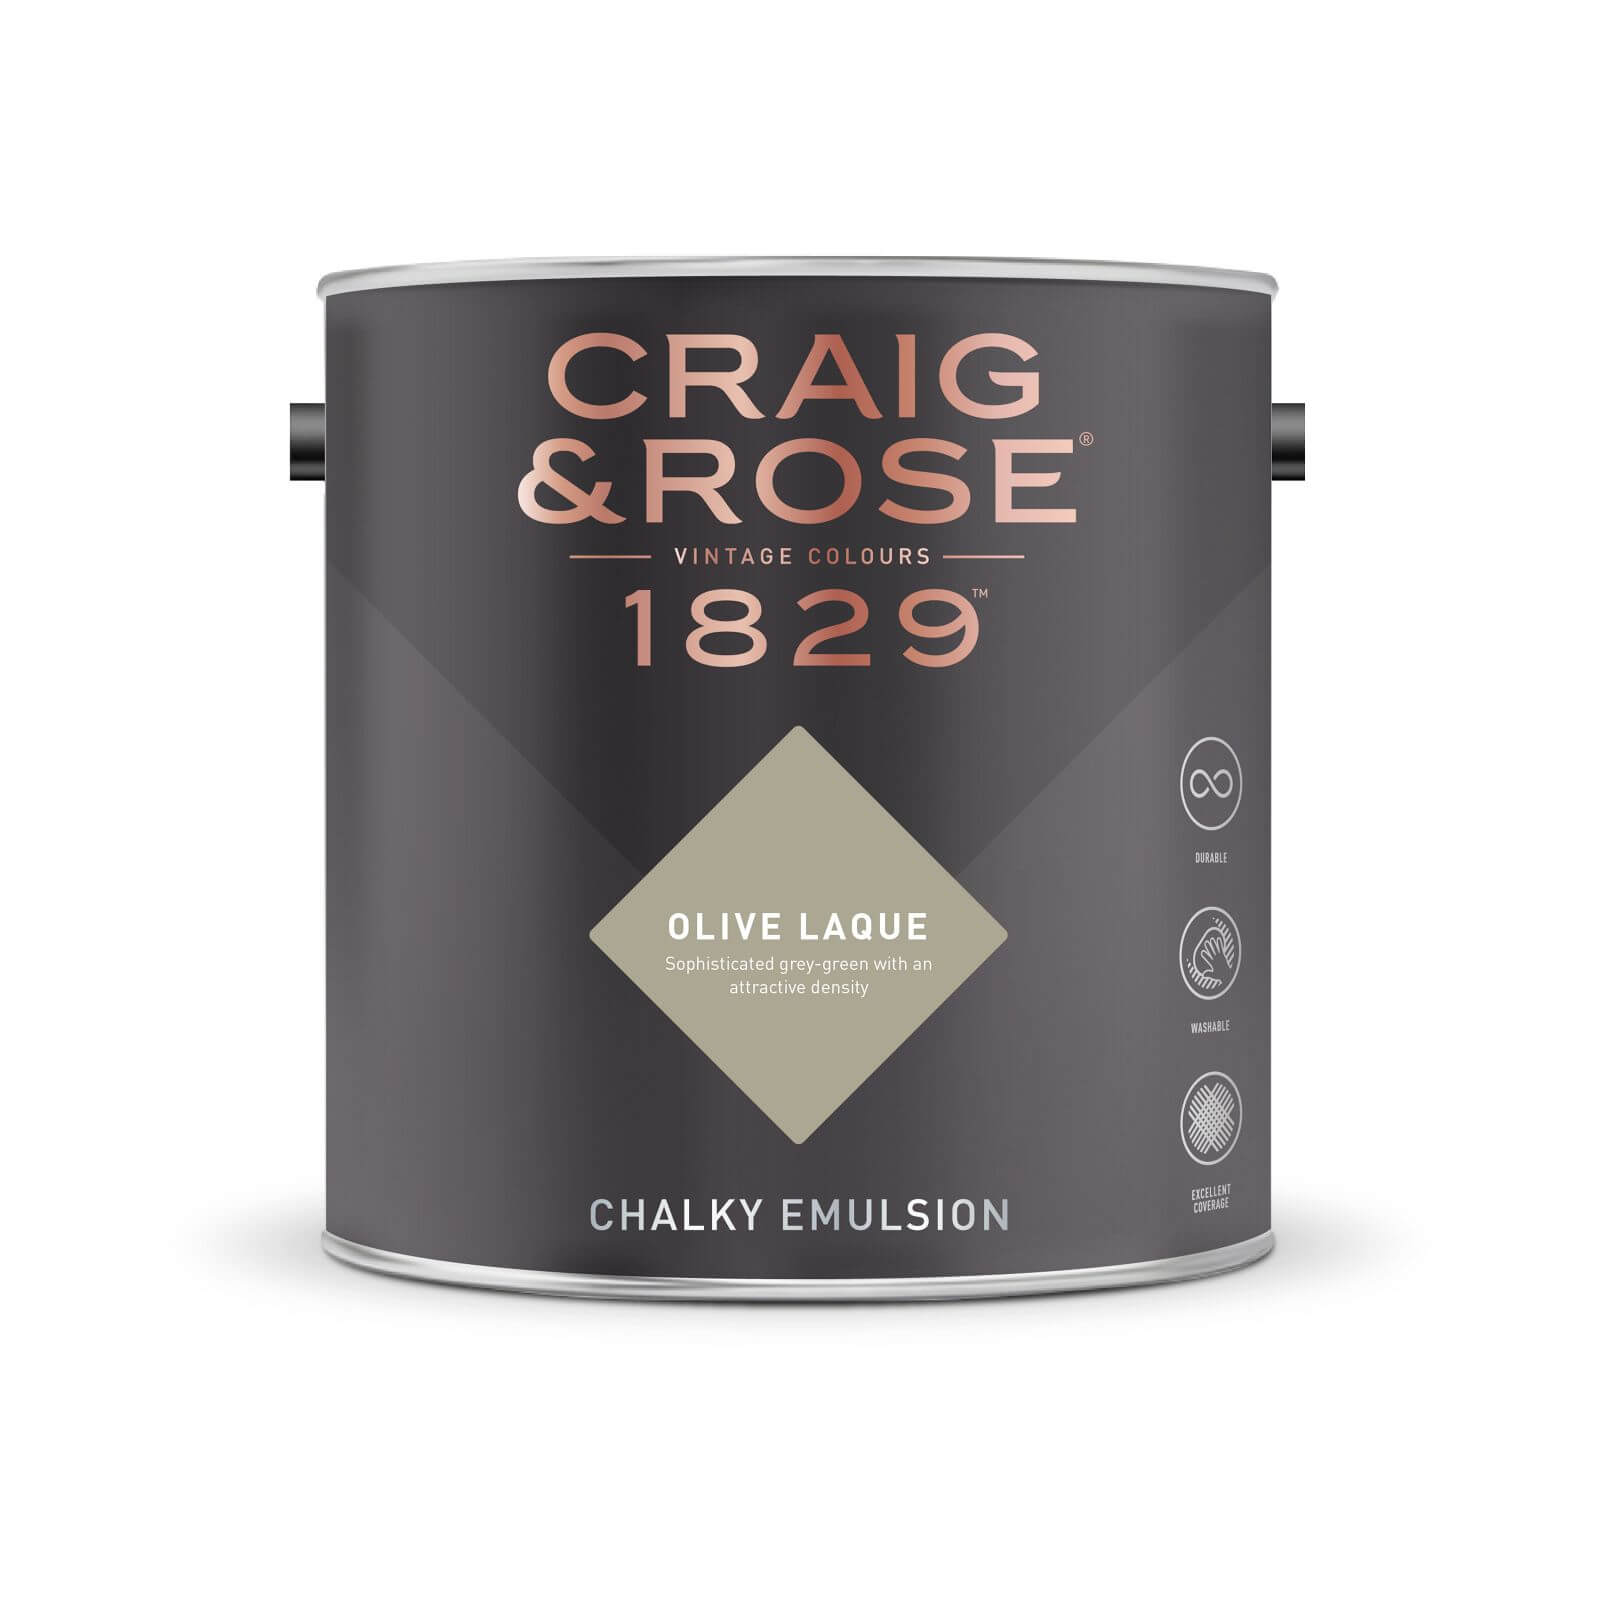 Craig & Rose 1829 Chalky Emulsion Paint Olive Laque - Tester 50ml